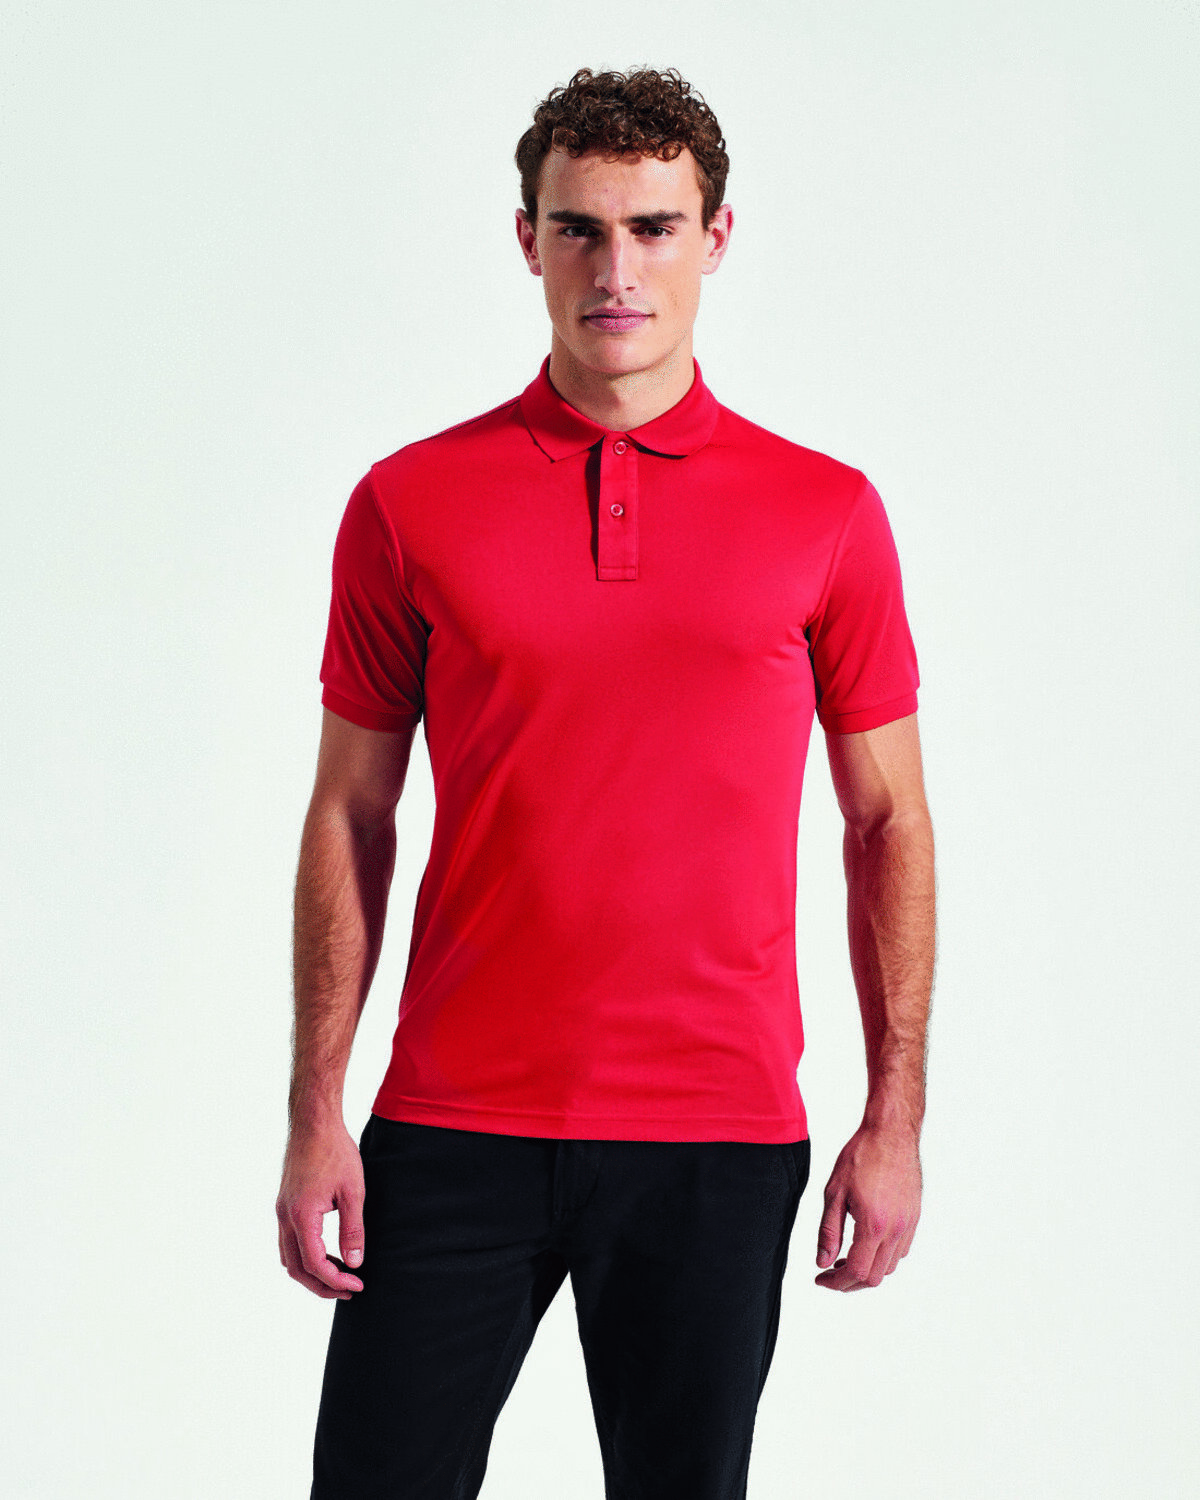 MENS RECYCLED POLYESTER PERFORMANCE POLO